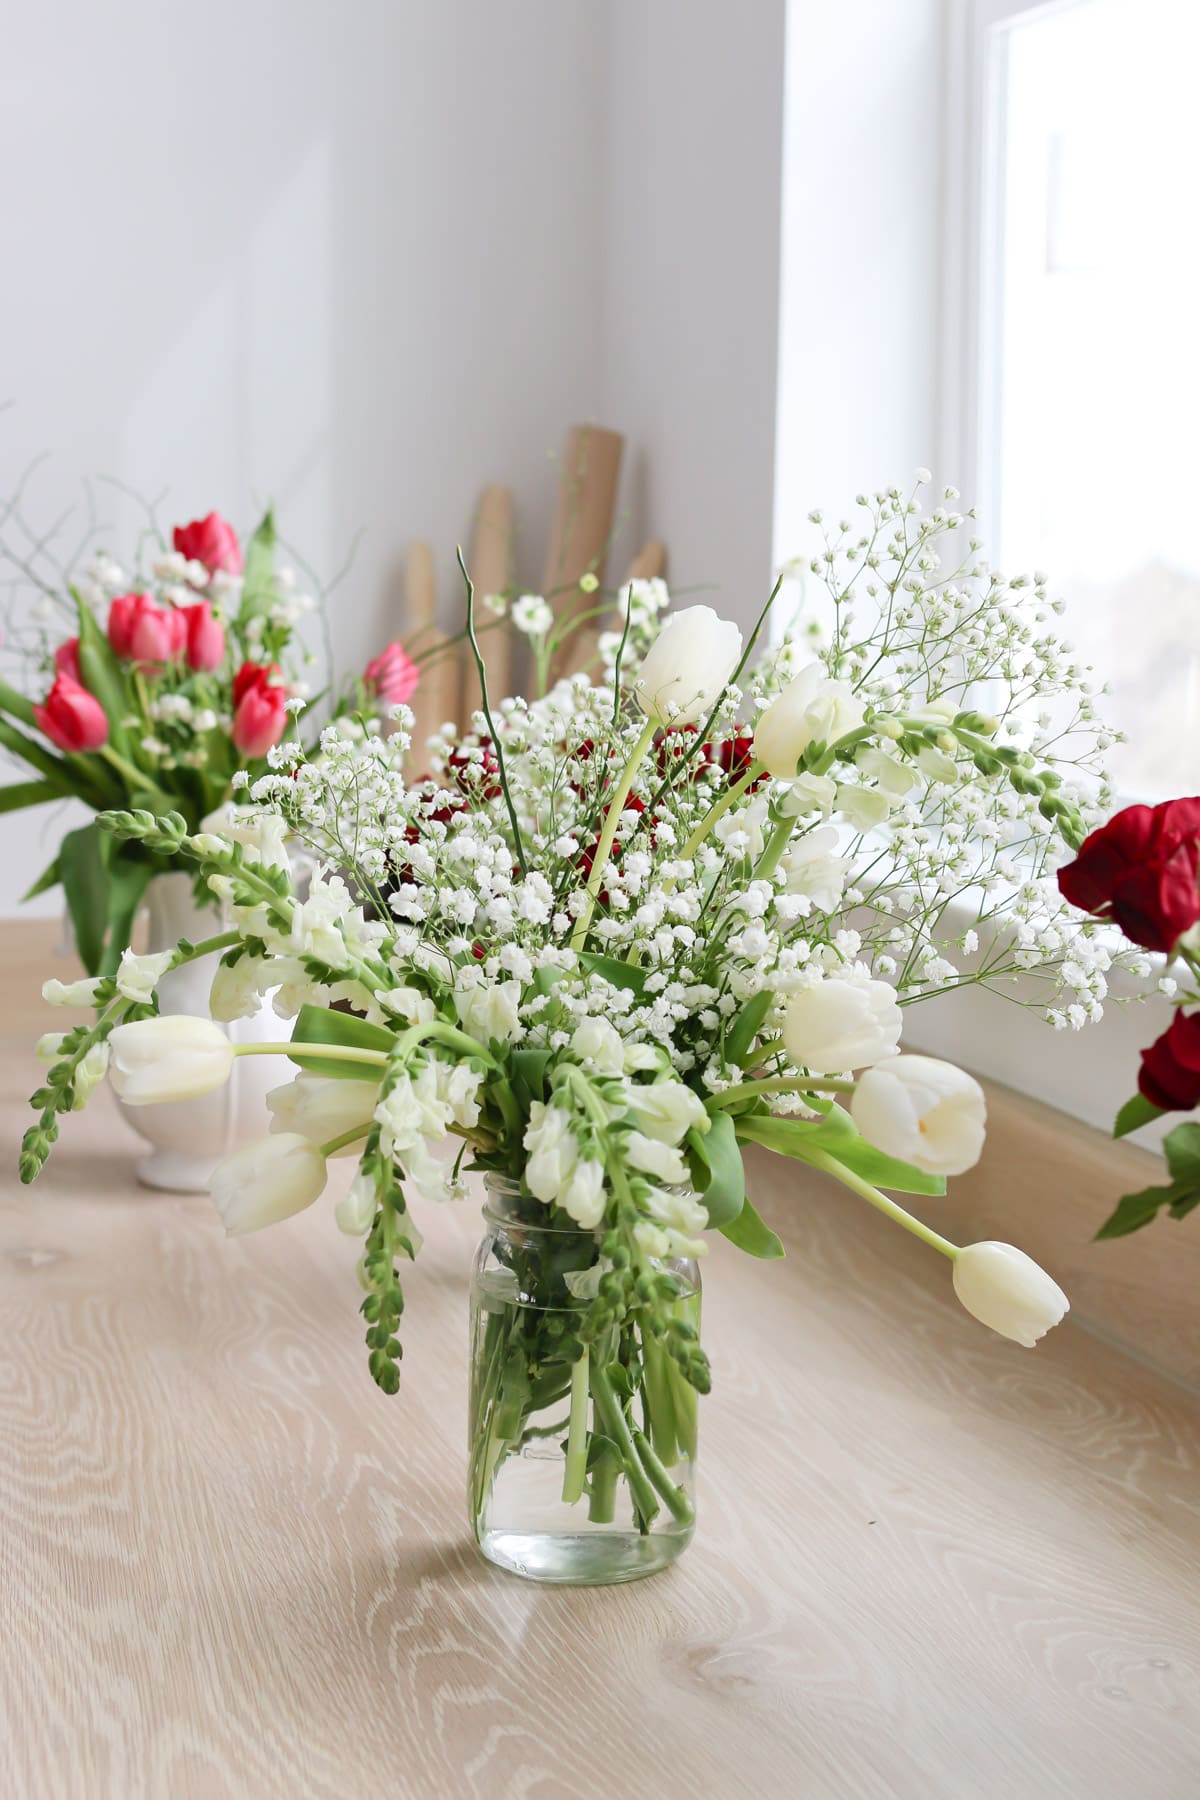 Tips for rearranging grocery store flower bouquets.